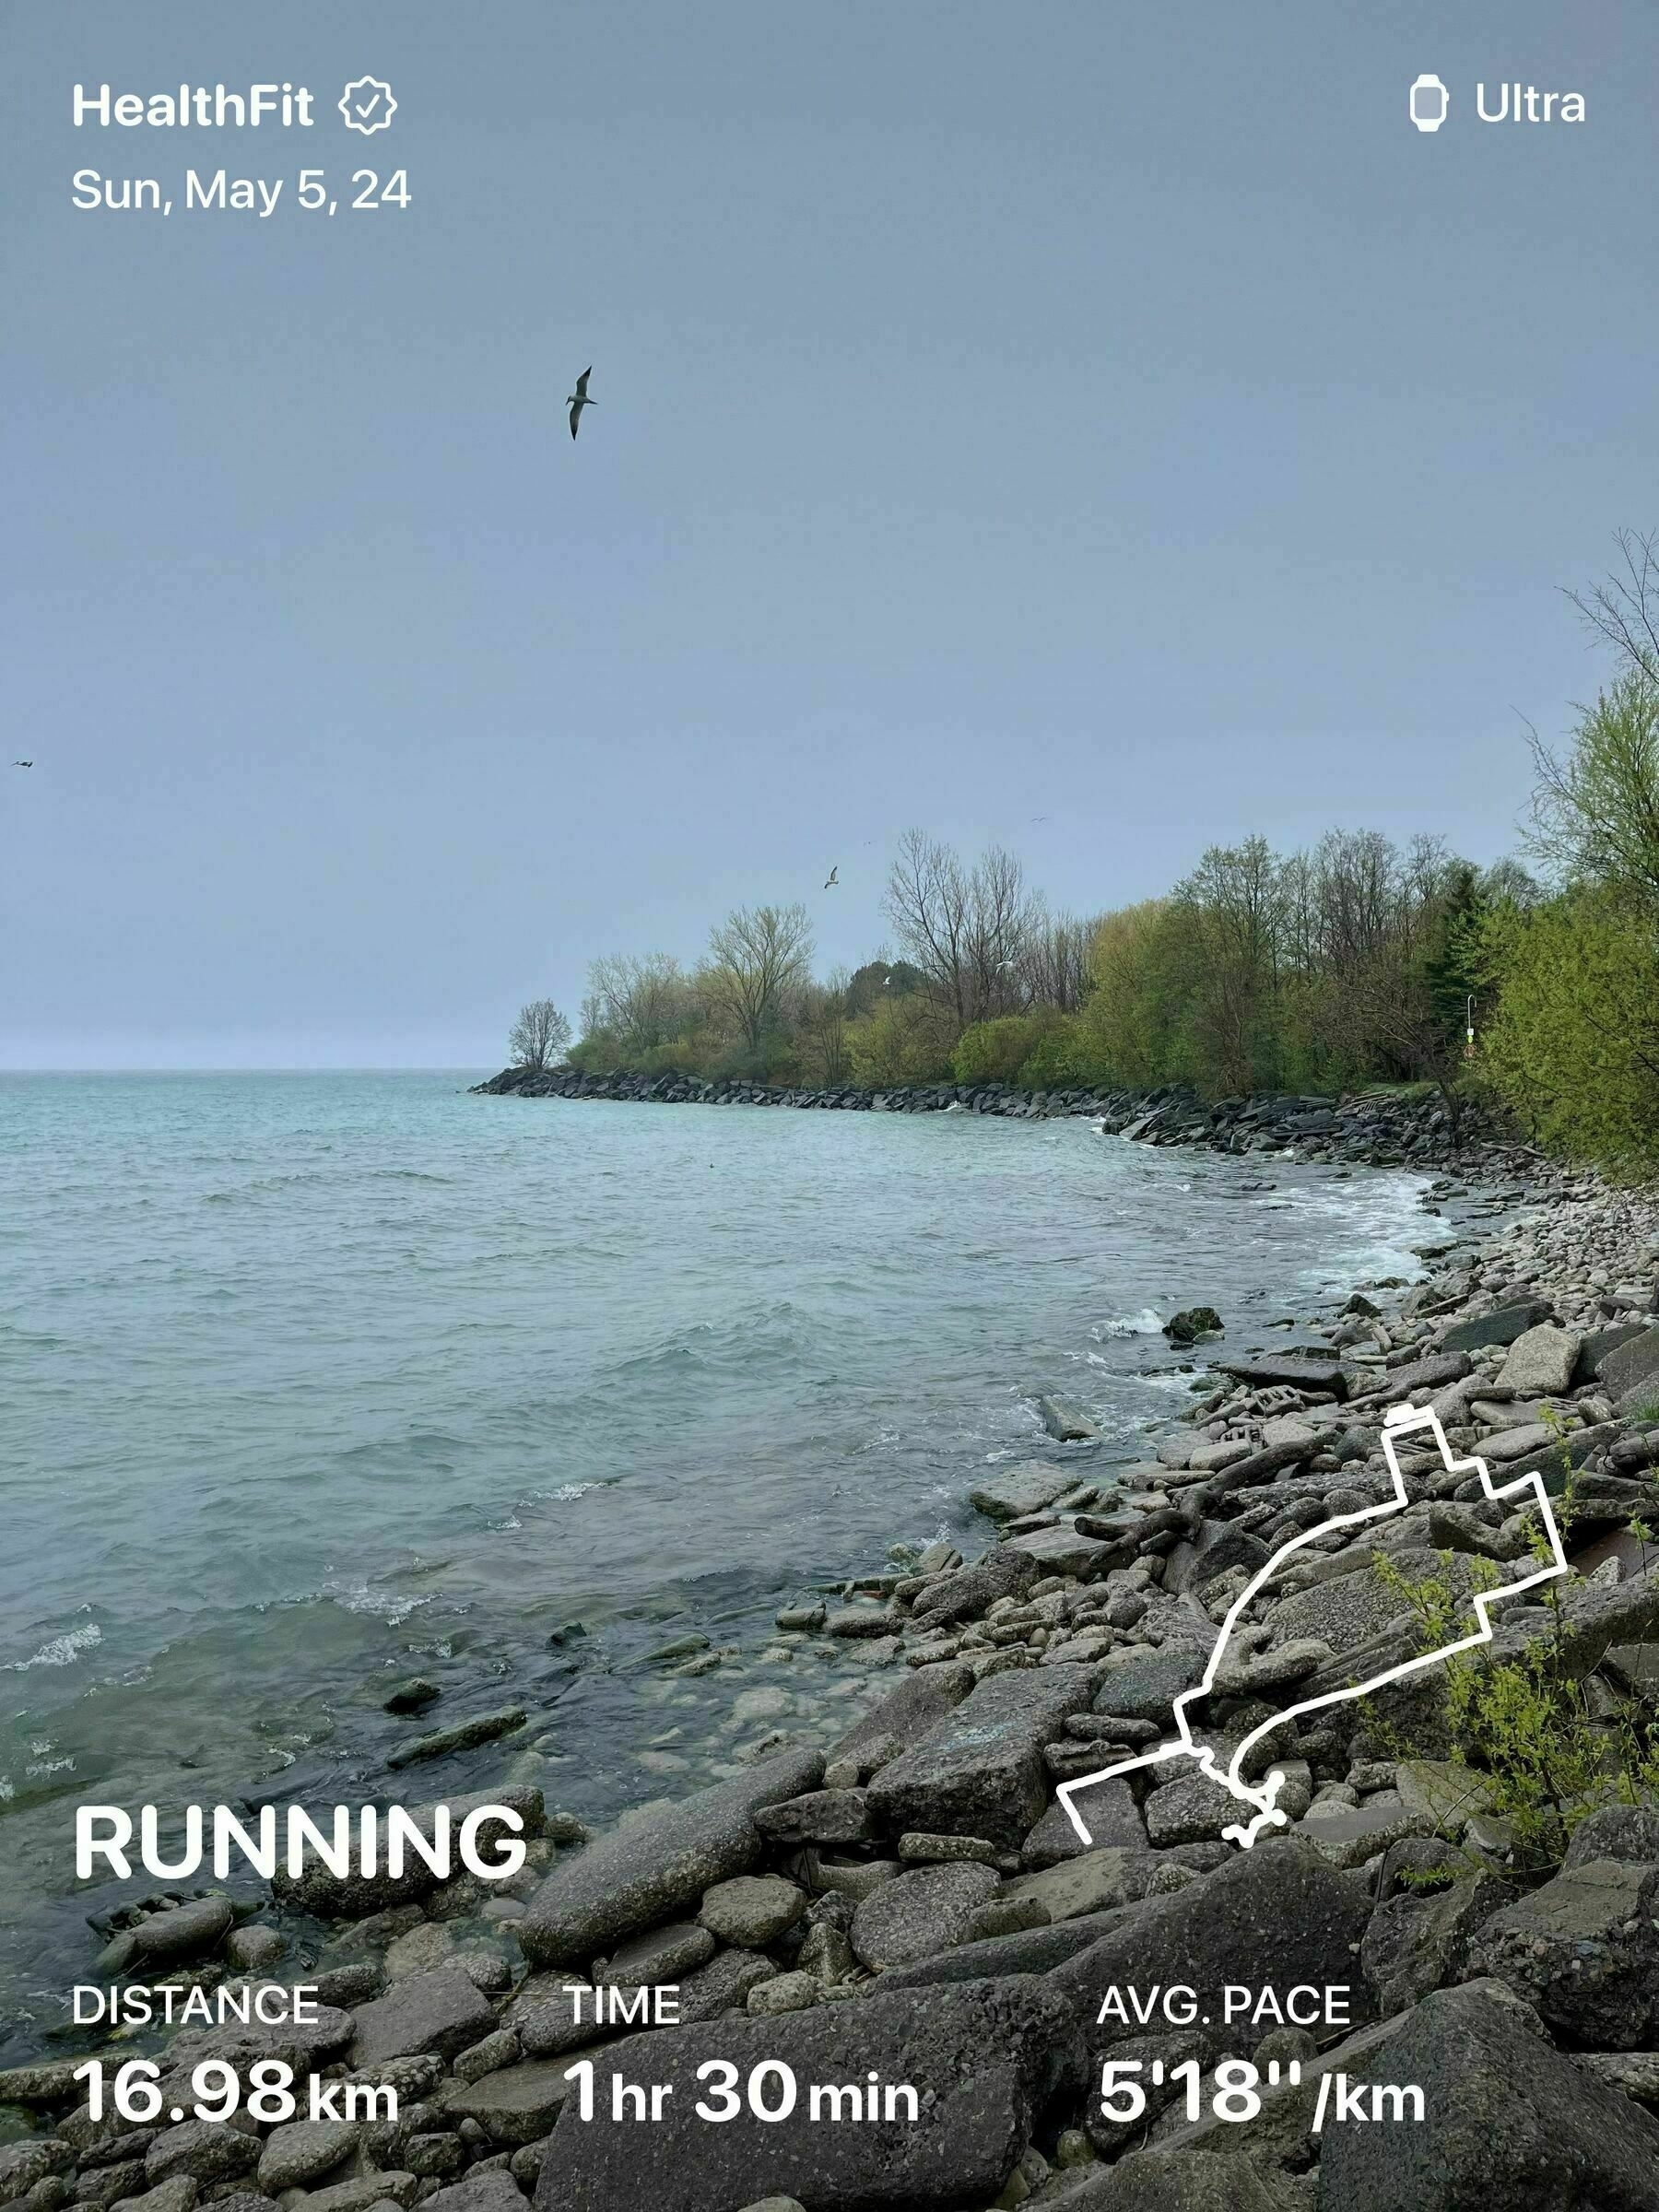 A rocky lakeshore with trees, birds flying, and overlay text from a fitness app about running stats: distance 16.98 km, time 1hr 30 min, pace 5'18km